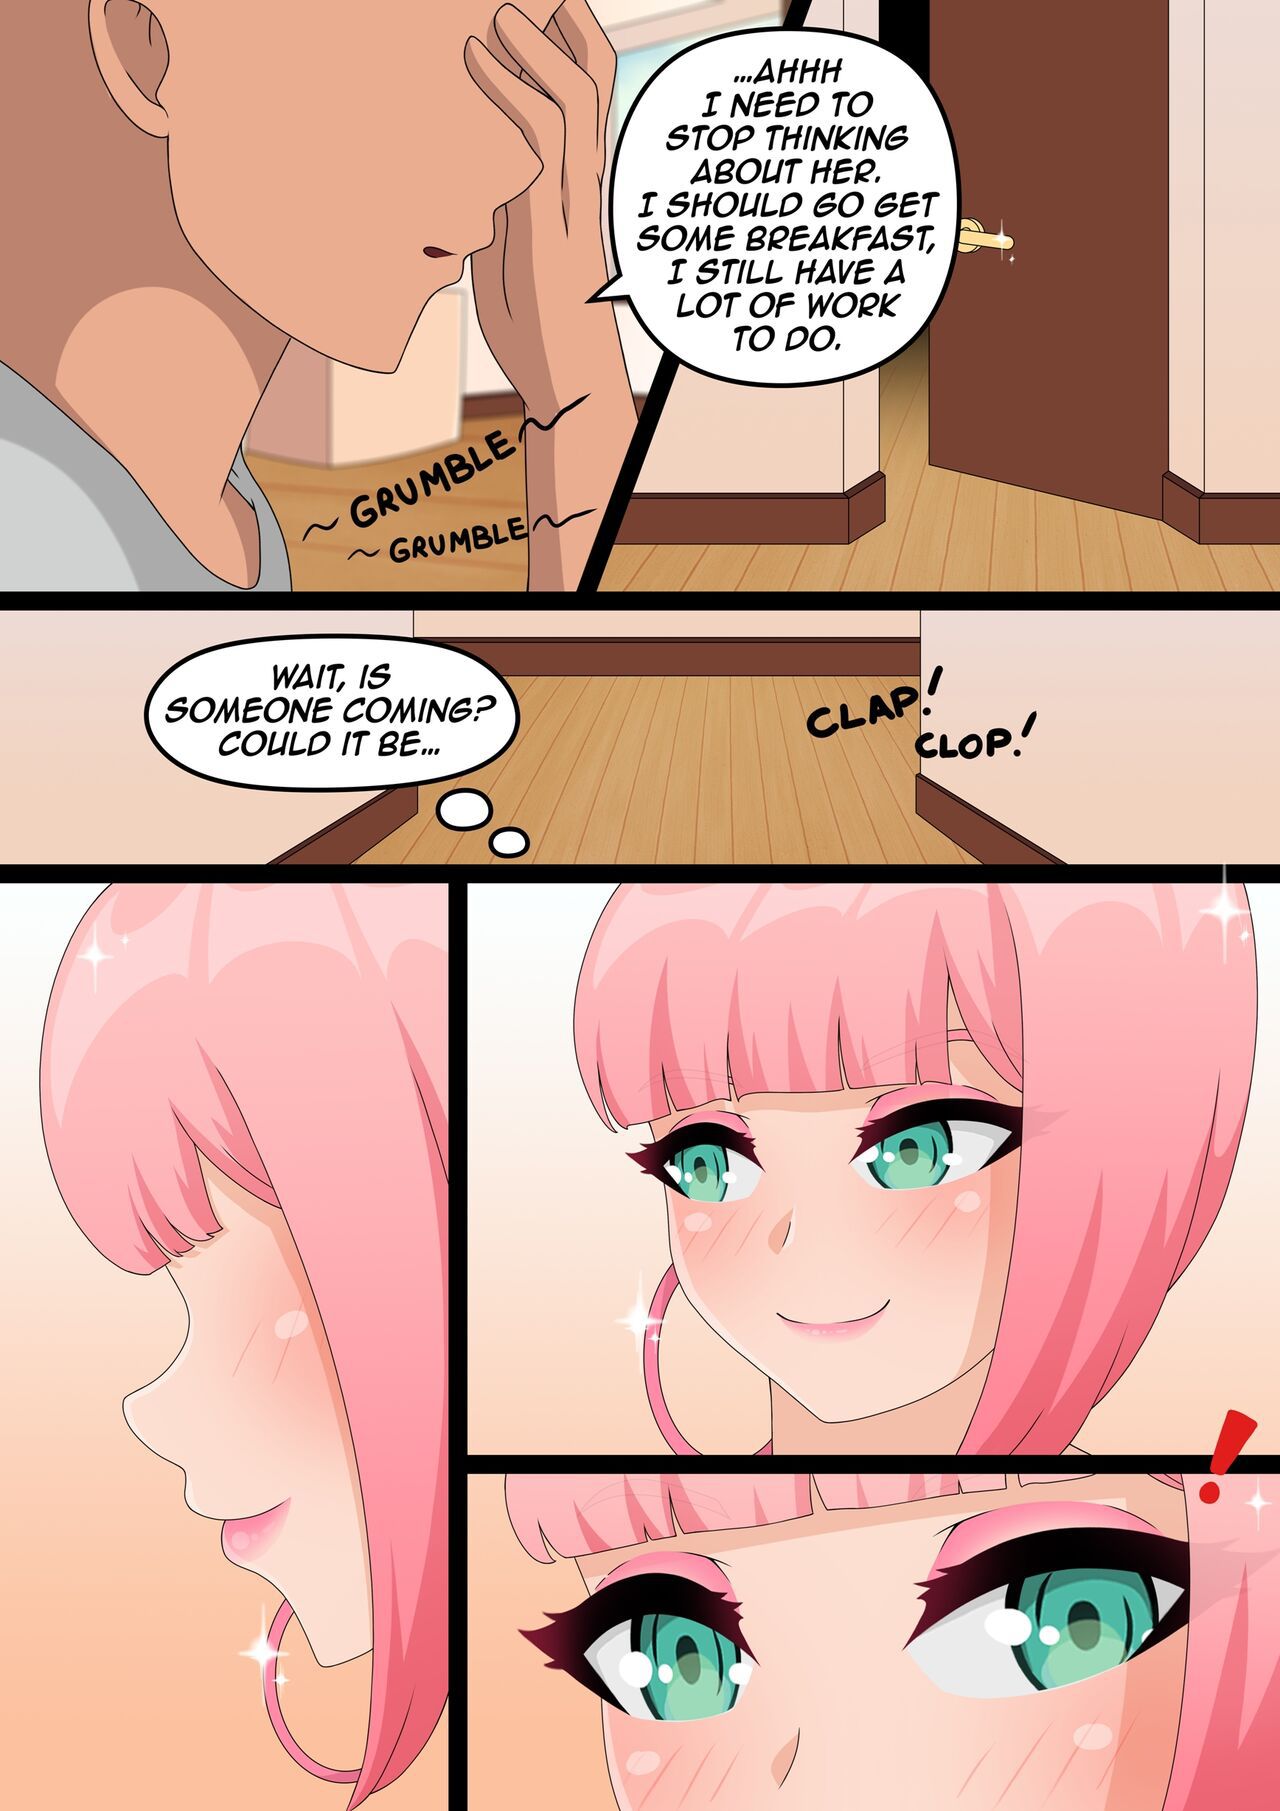 Zoey The Love Story [page 24 added] 11